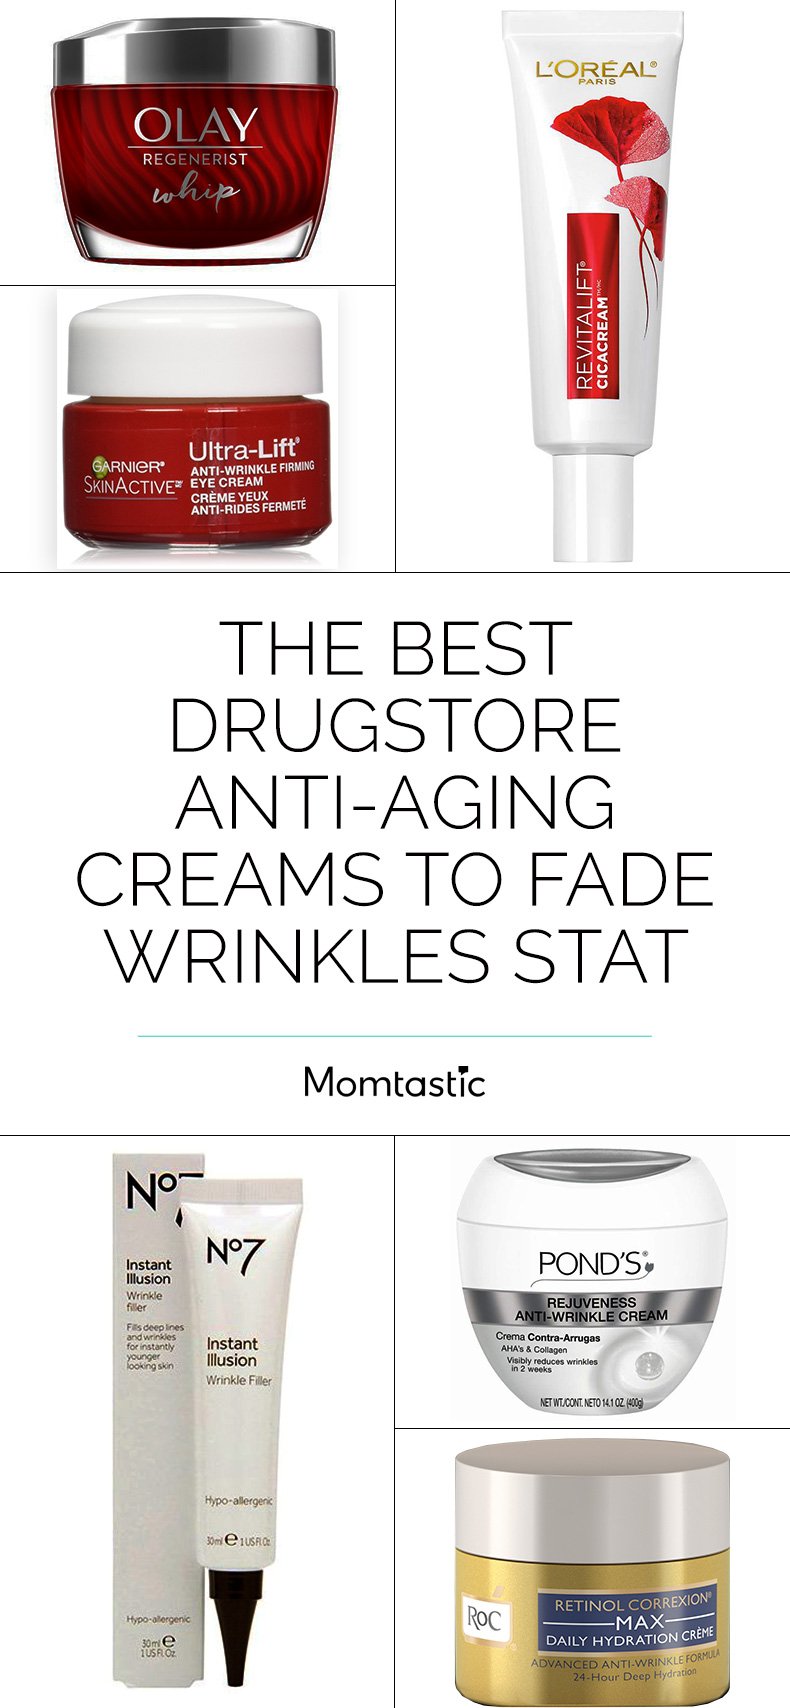 The Best Drugstore Anti-Aging Creams to Fade Wrinkles Stat